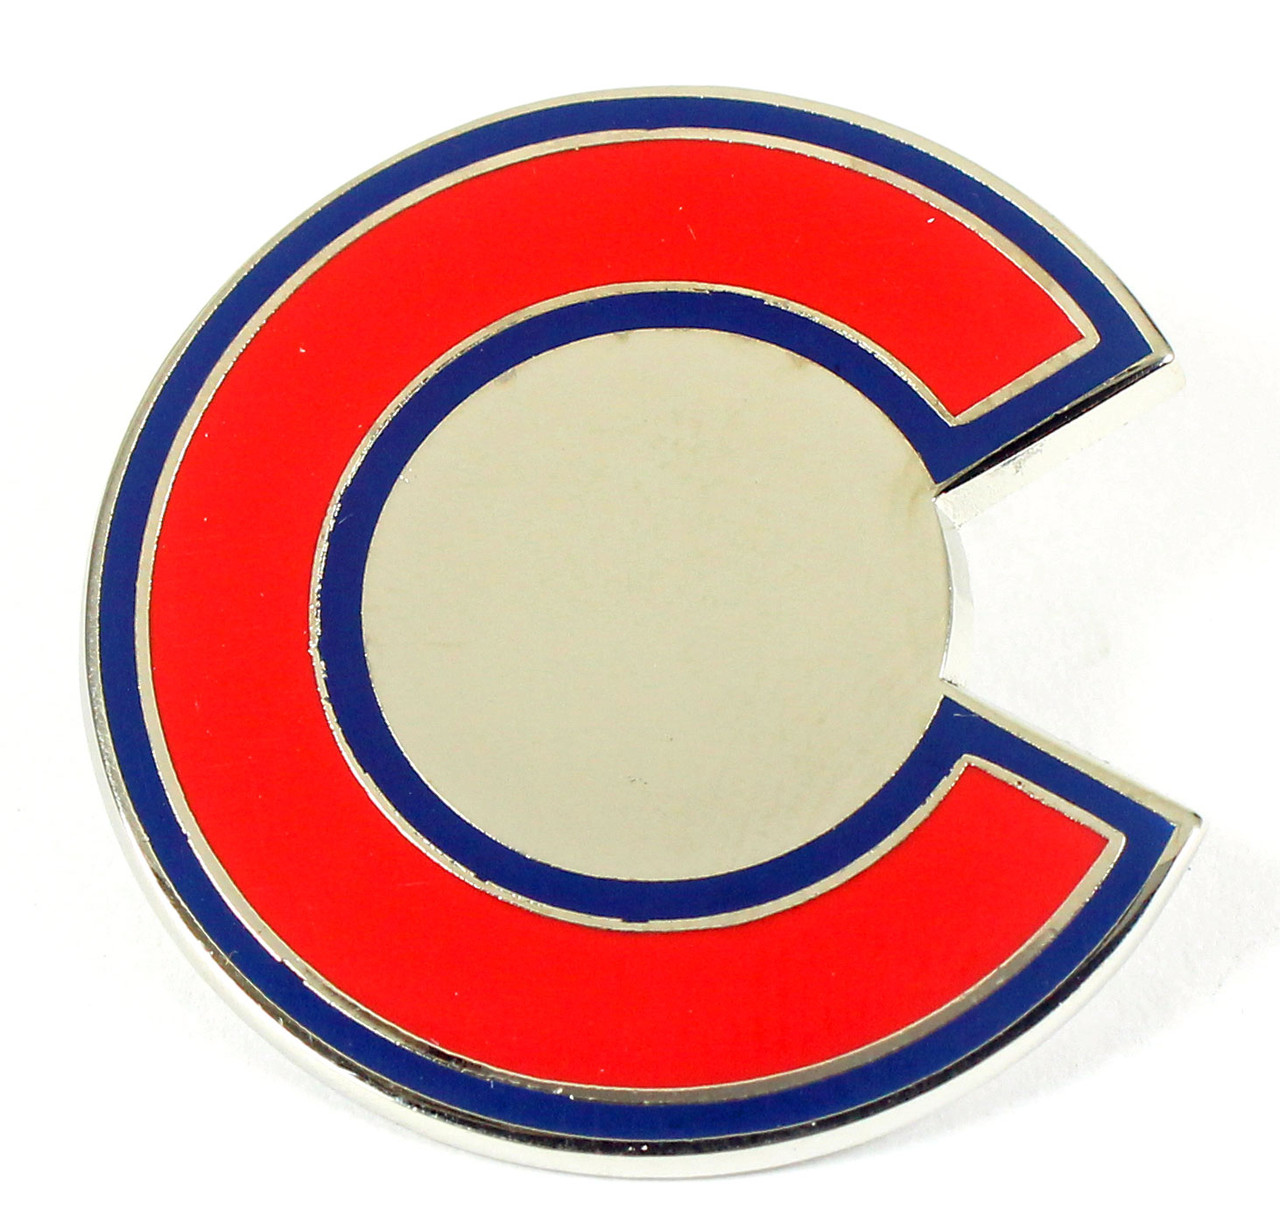 Pin on Chicago Cubs